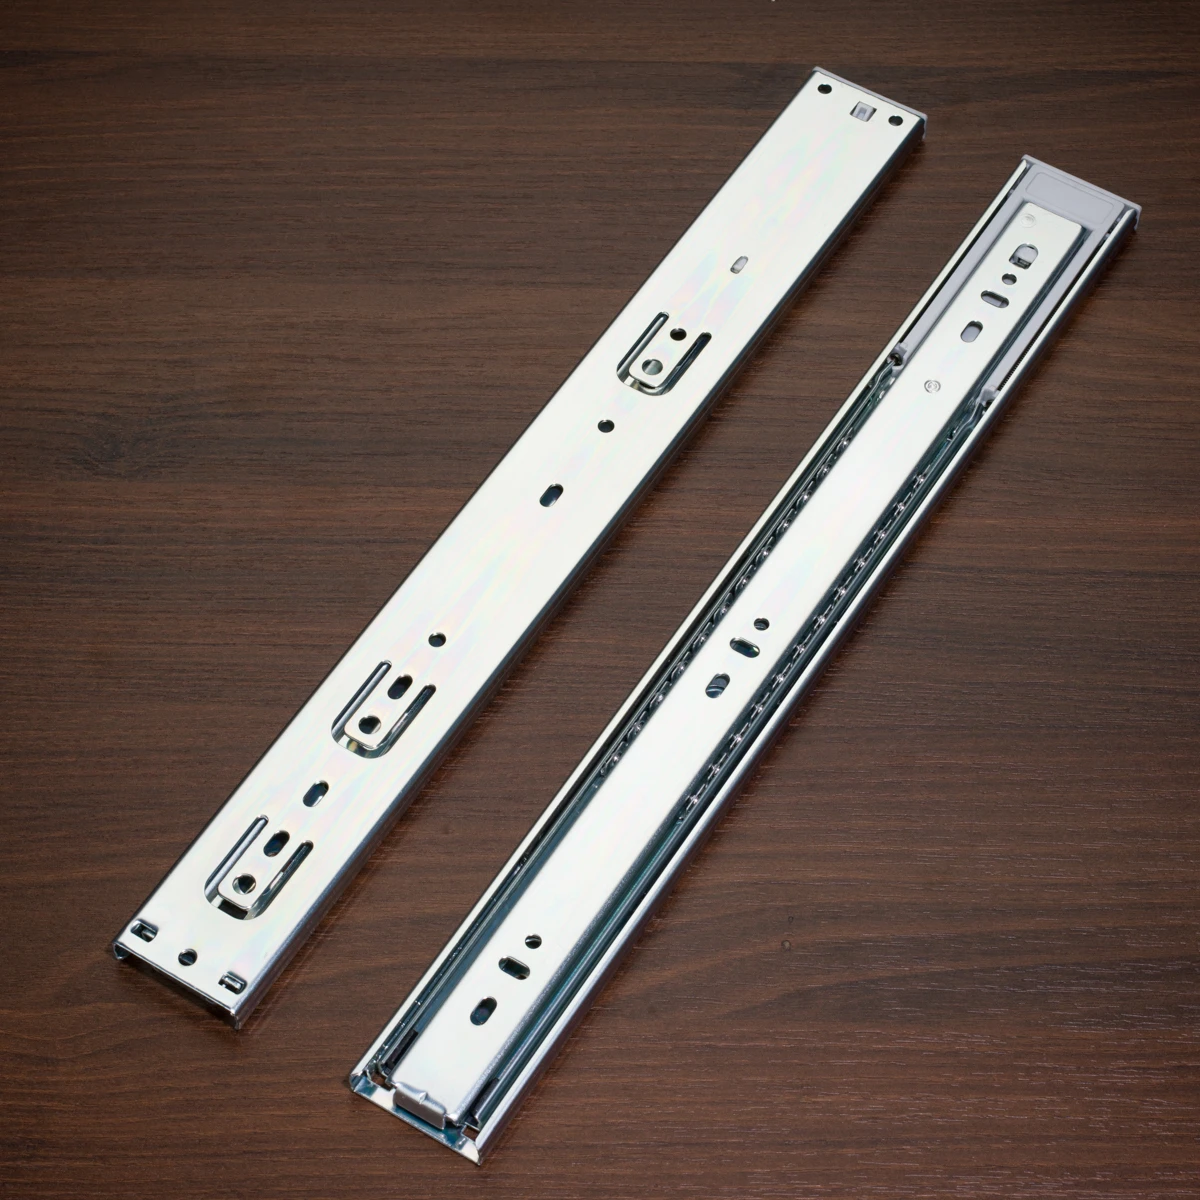 Foshan Supply 45mm full extension ball bearing soft close drawer slide rails with double spring mechanism